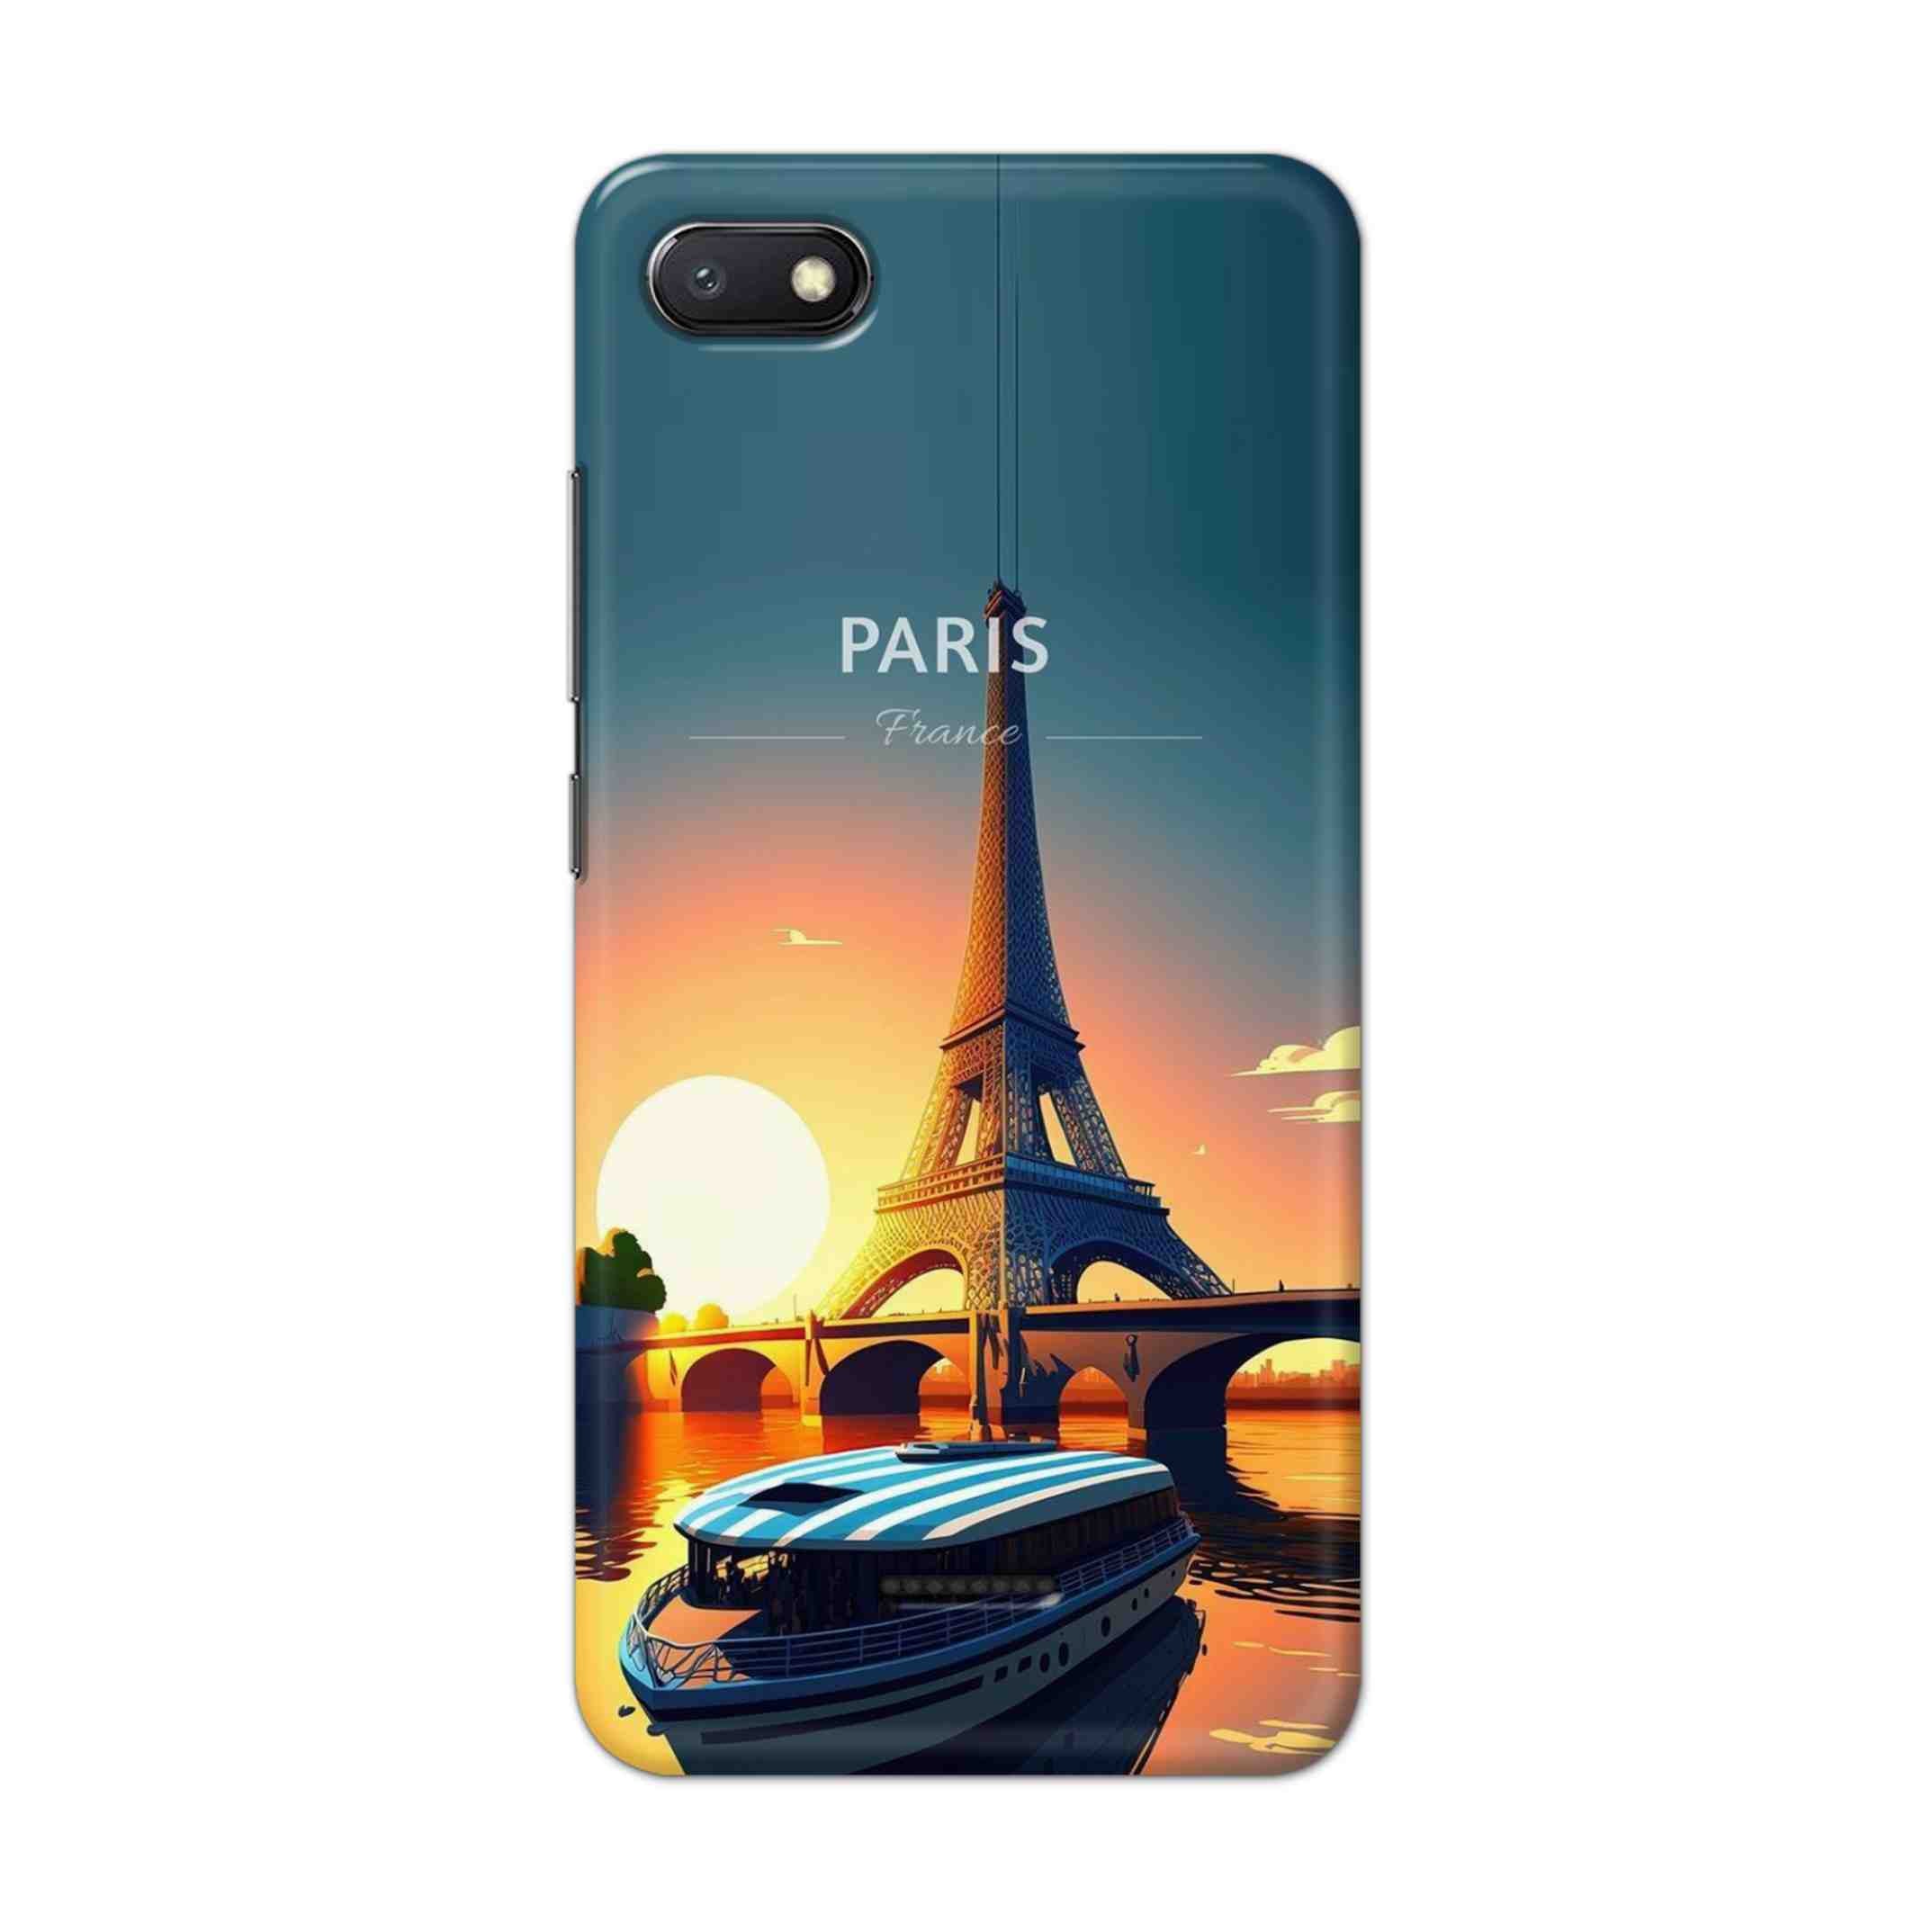 Buy France Hard Back Mobile Phone Case/Cover For Xiaomi Redmi 6A Online